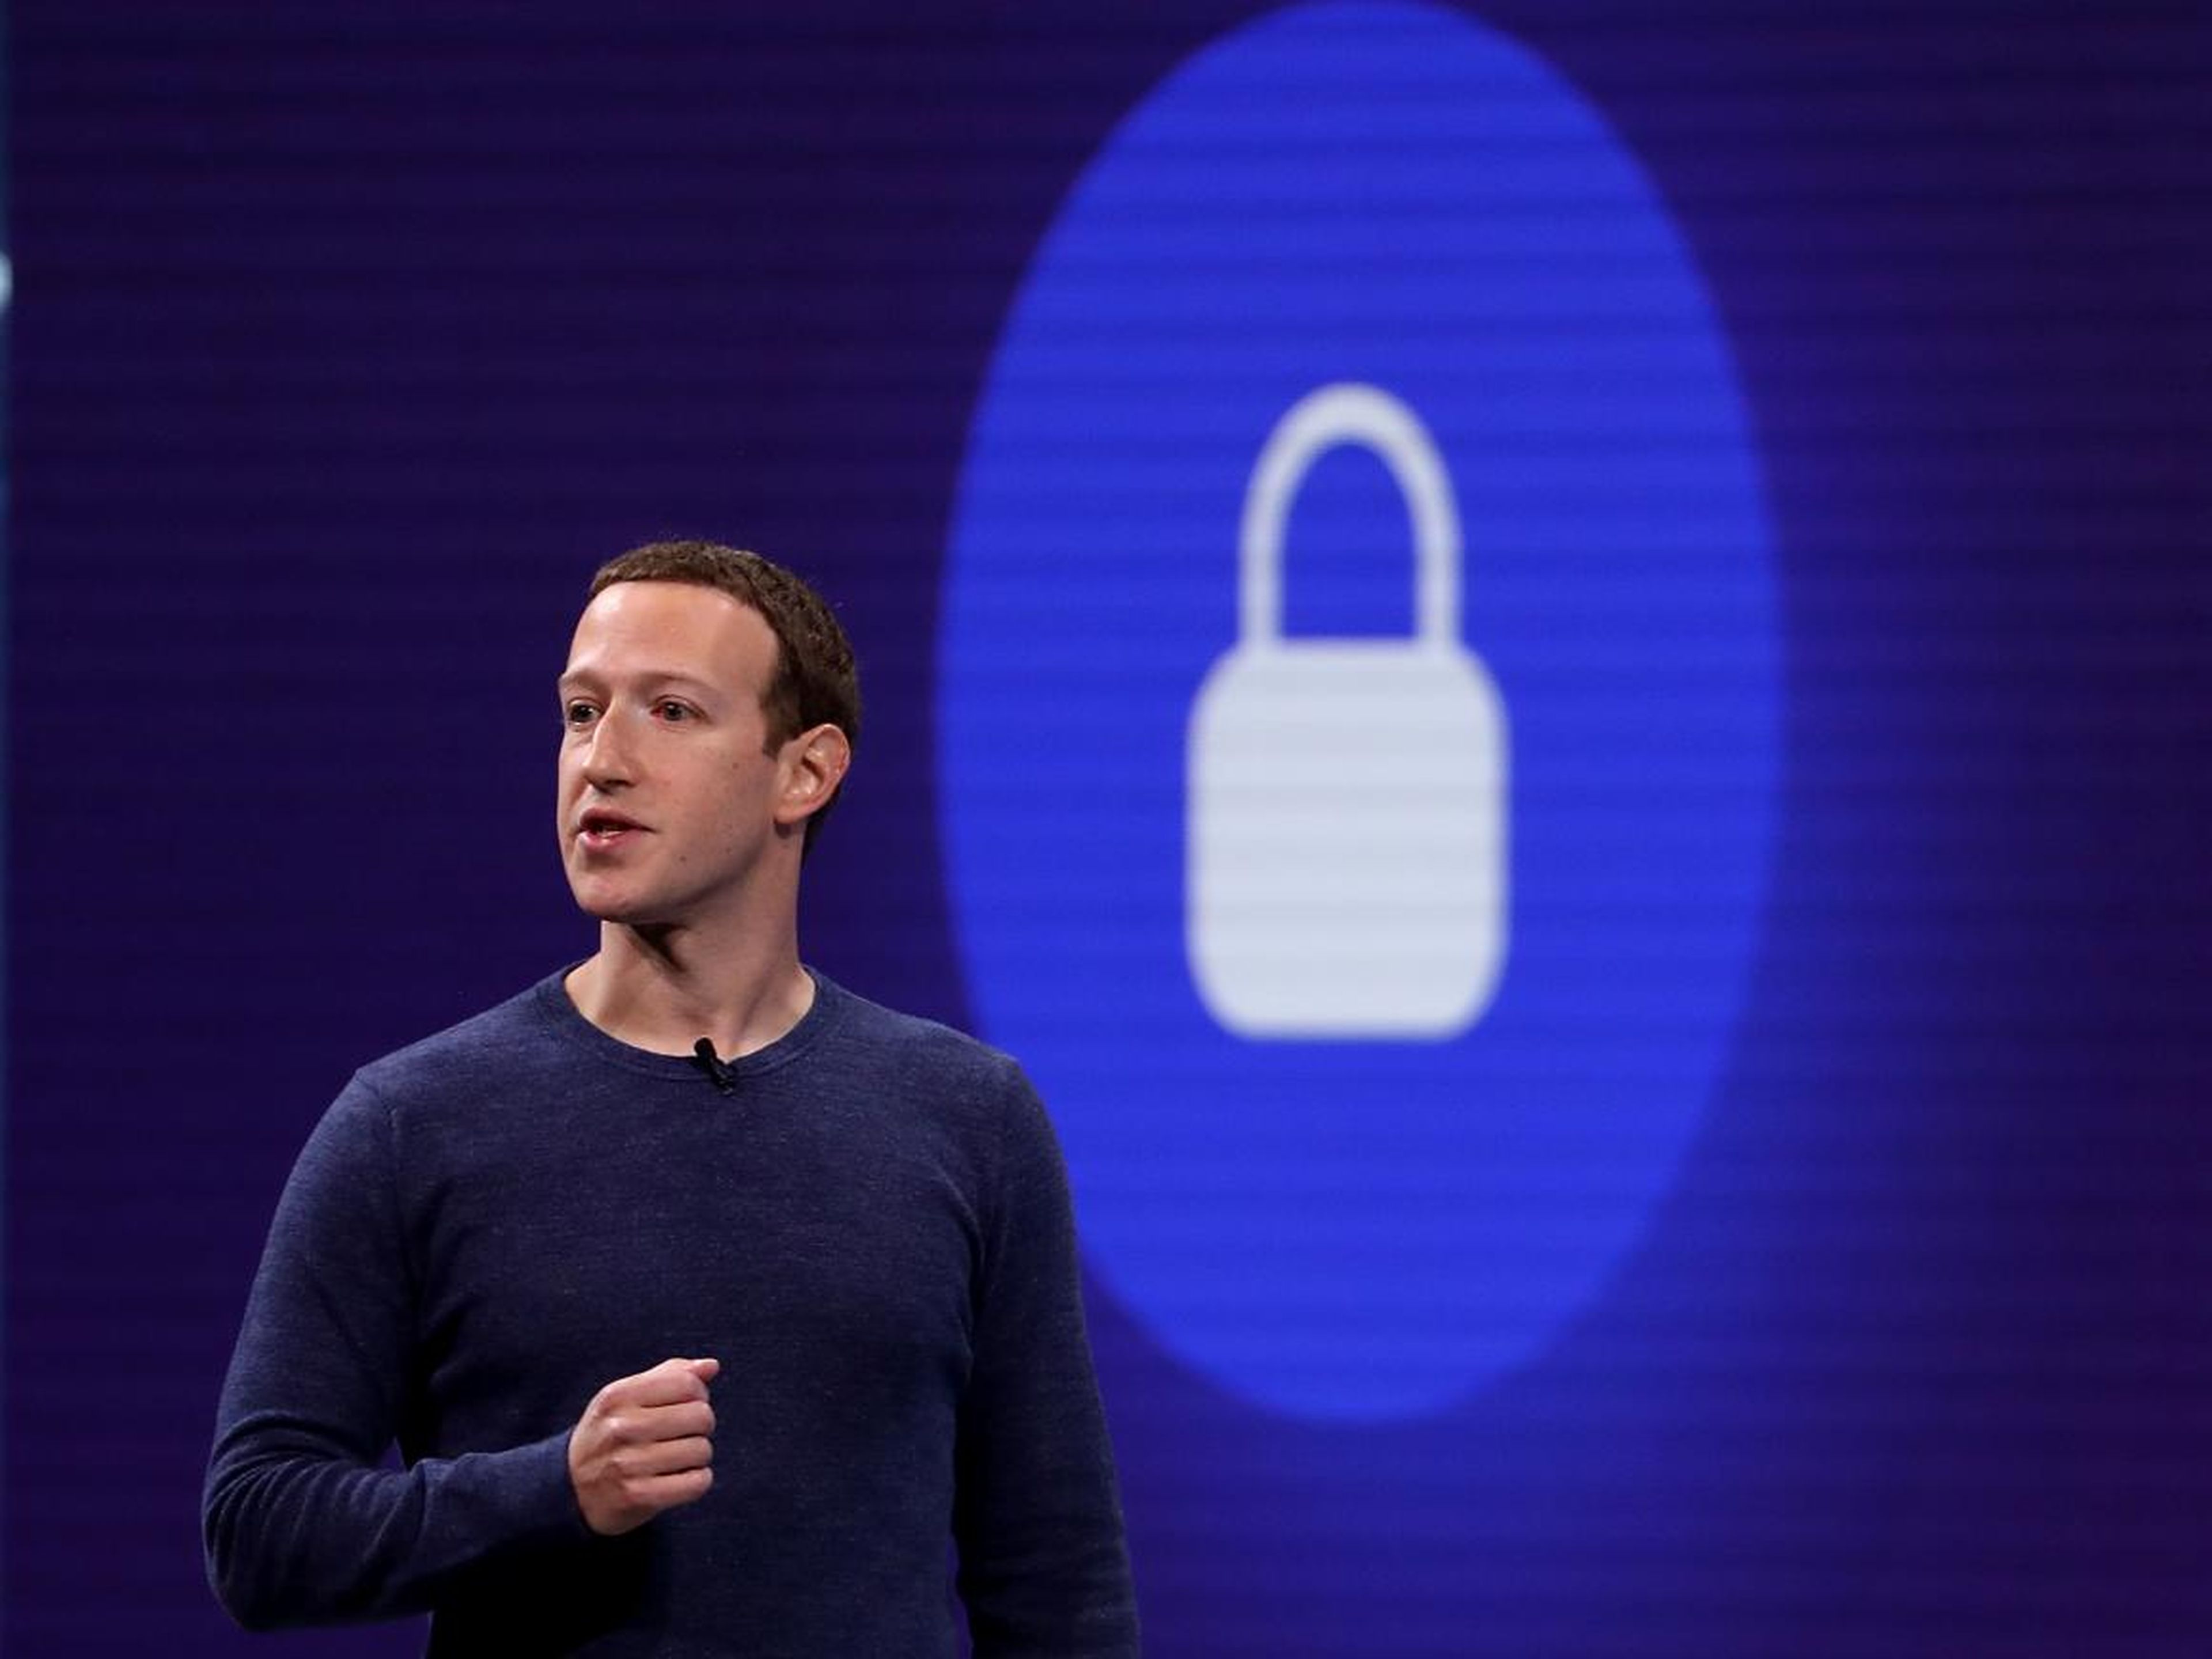 Zuckerberg's leadership again came into question in November 2018, when an explosive New York Times report said Facebook knew about Russian efforts to interfere in the US election as early 2016, but waited more than a year to